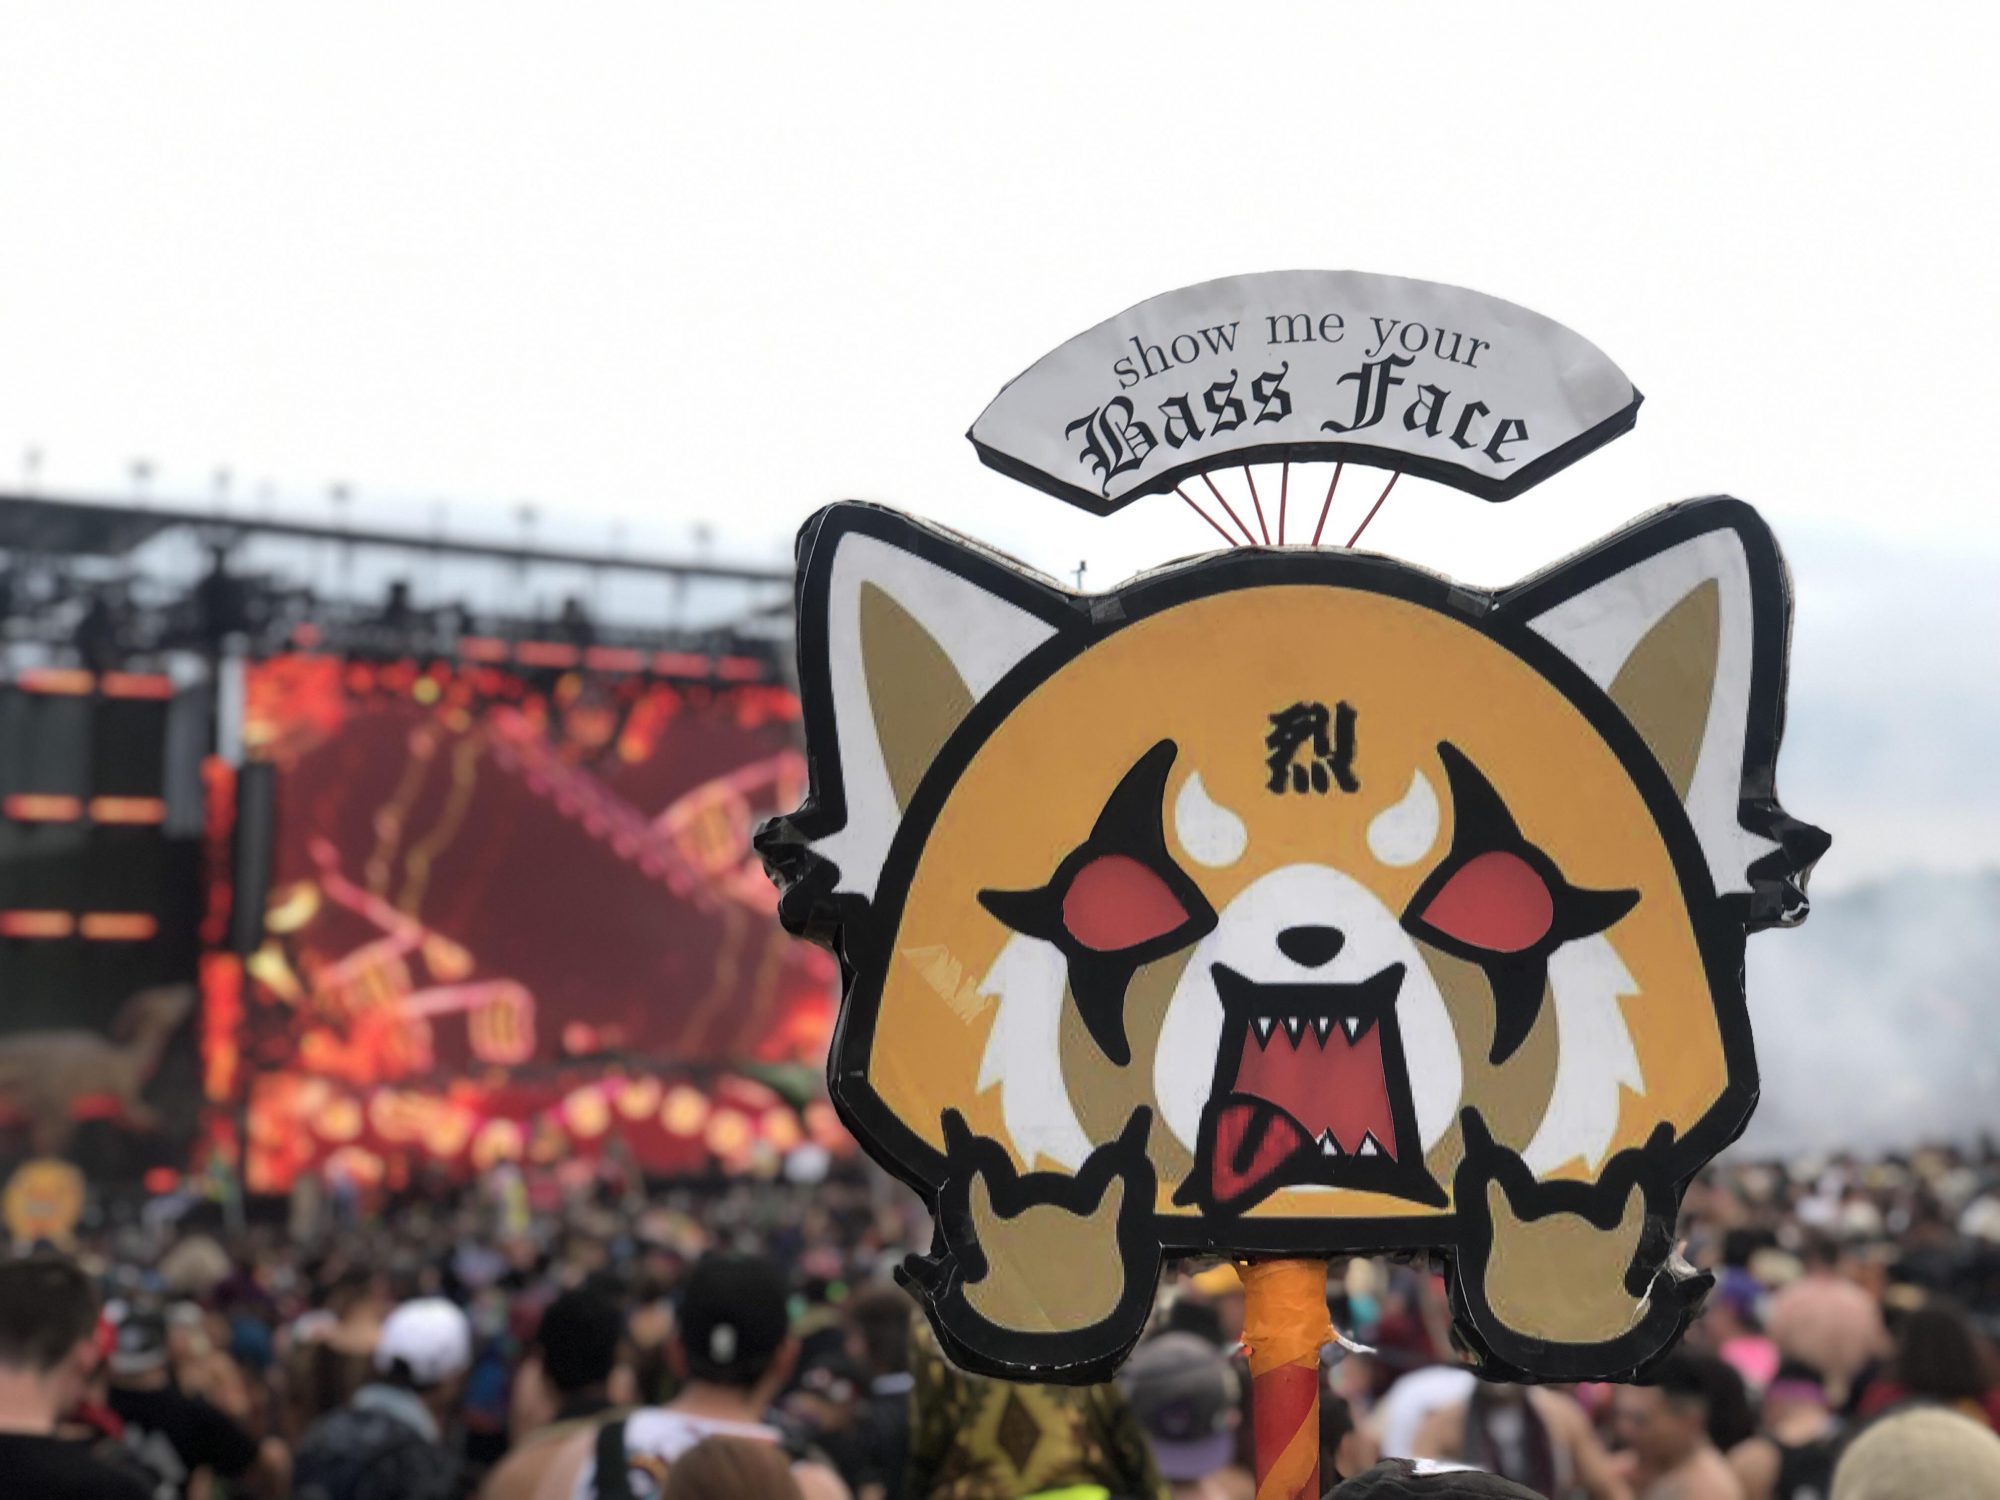 Bass Face Totem Lost Lands 2019